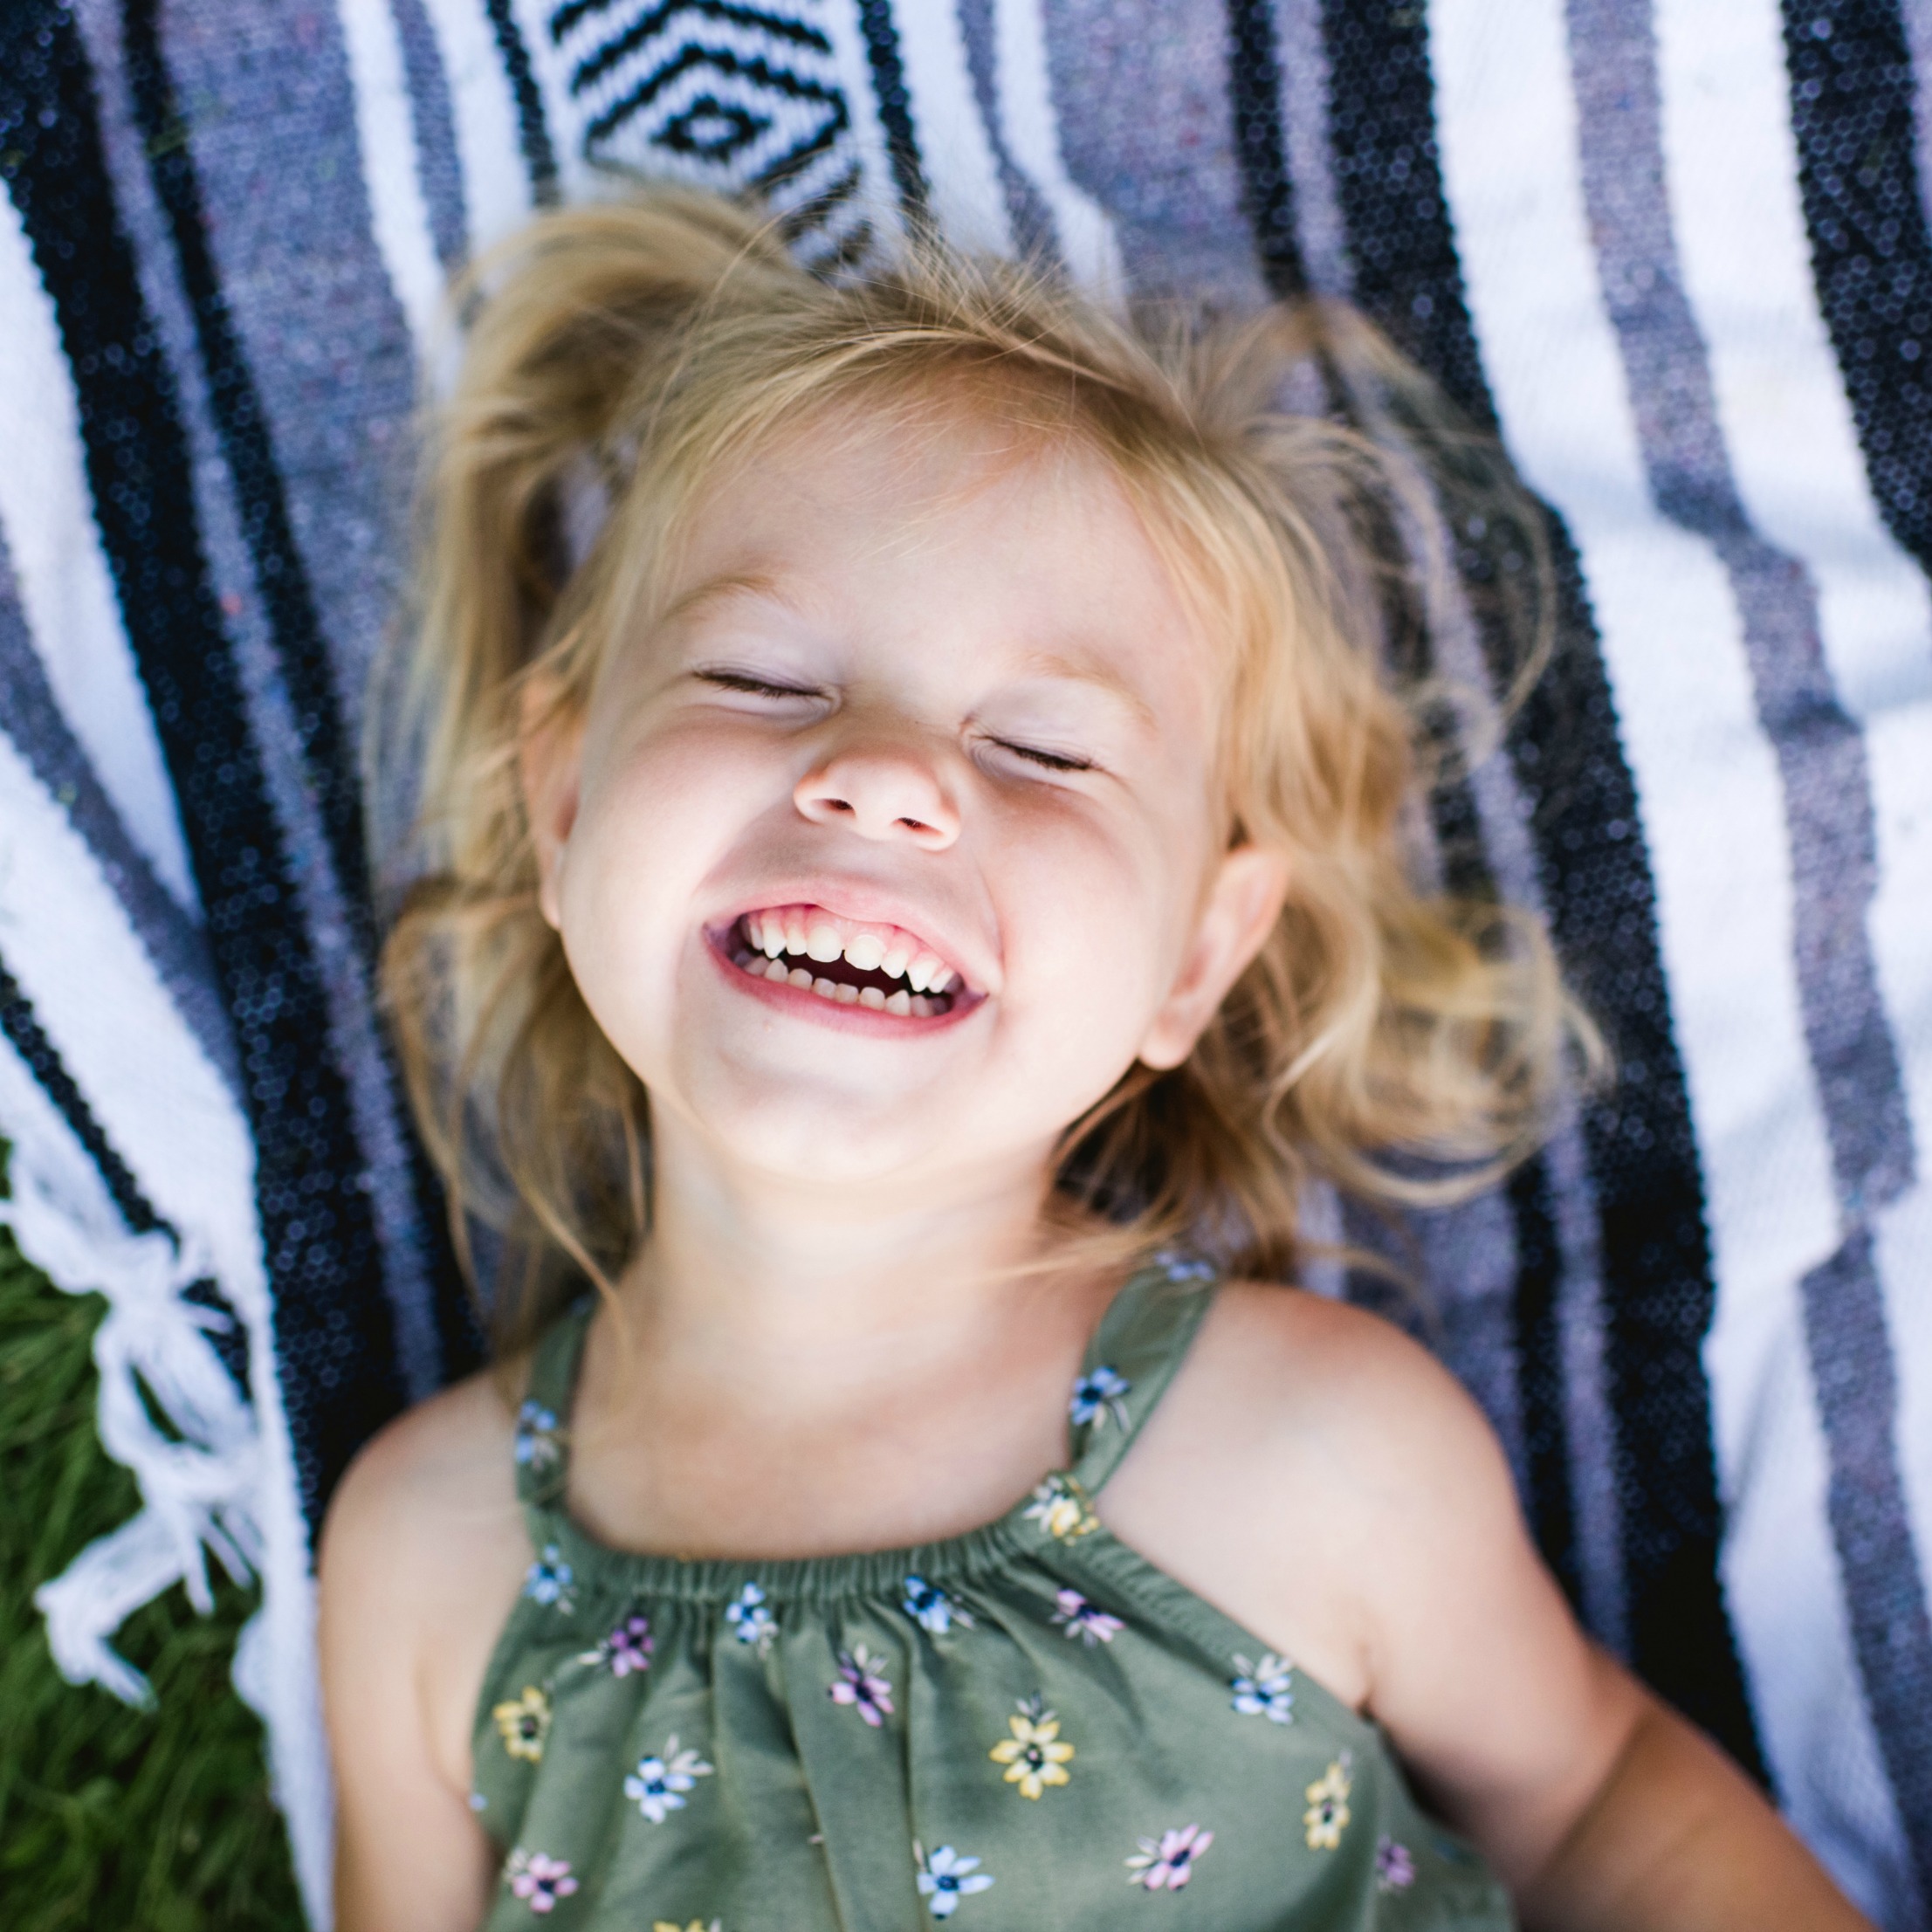 40+ Quick & Simple Ways to Brighten Your Child’s Day